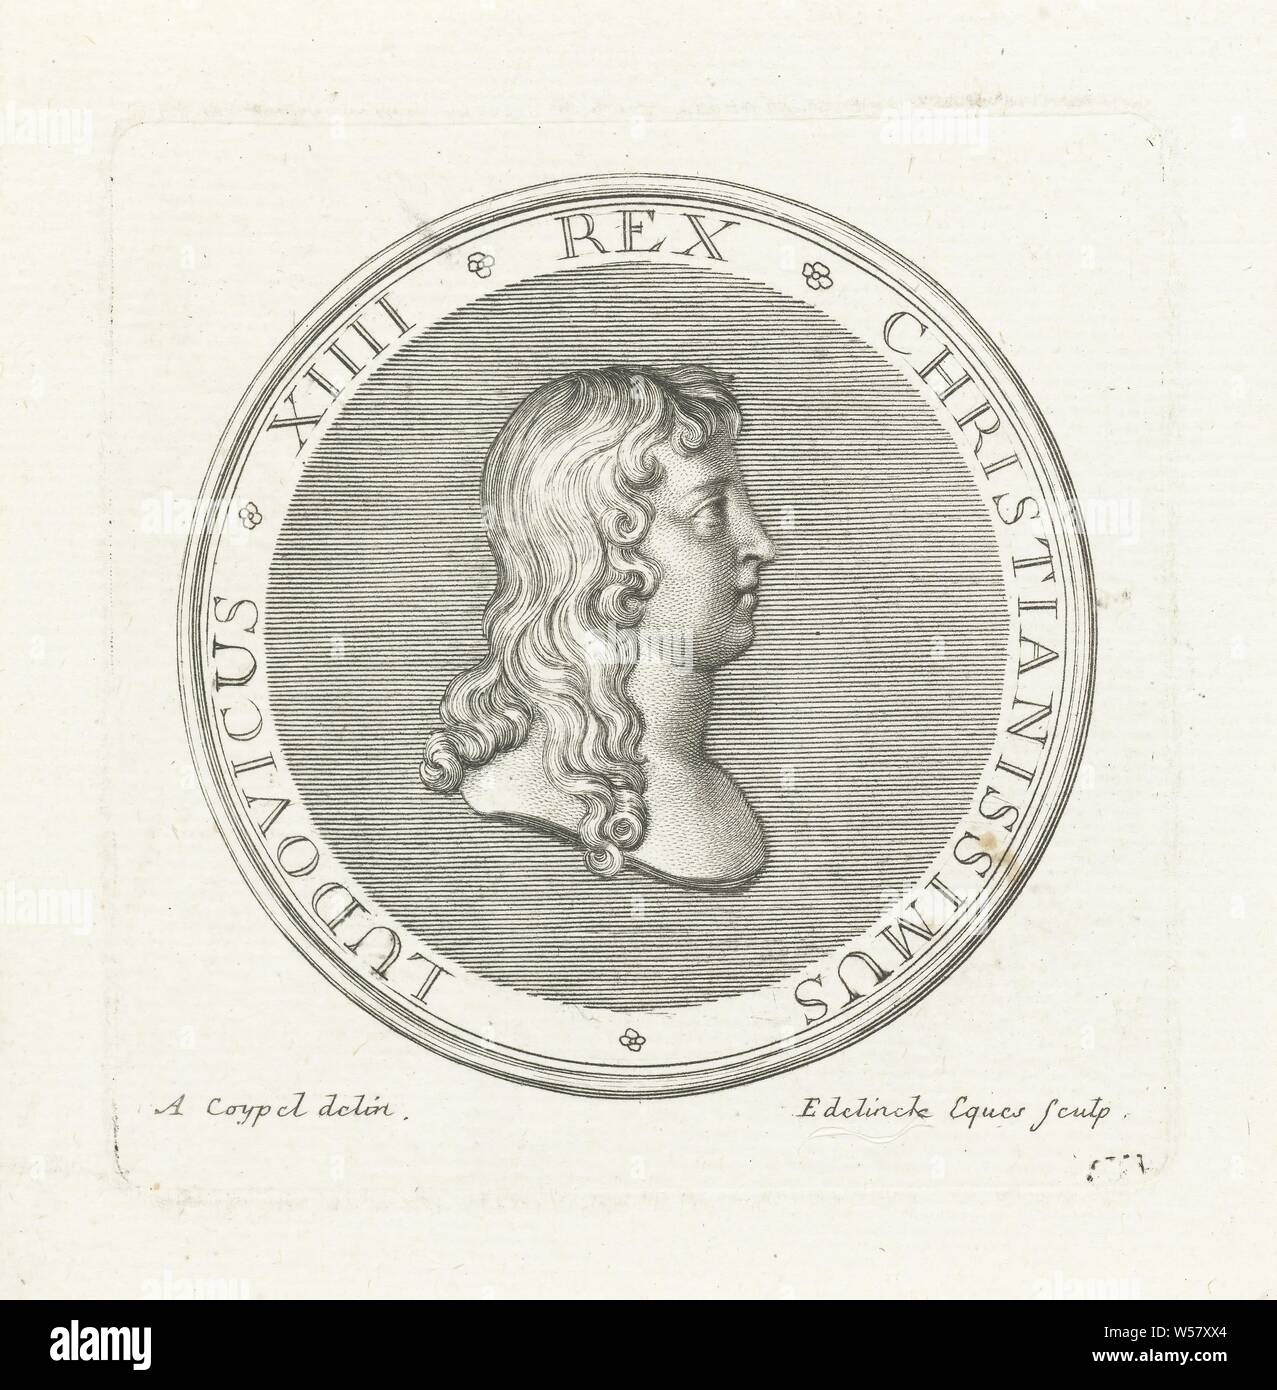 Medal with bust of Louis XIV, Front of a badge with bust and profile of Louis XIV, first issued after the Battle of Rocroi in 1643., Louis XIV (King of France), Gerard Edelinck (mentioned on object), Paris, 1702, paper, engraving, h 82 mm × w 81 mm Stock Photo